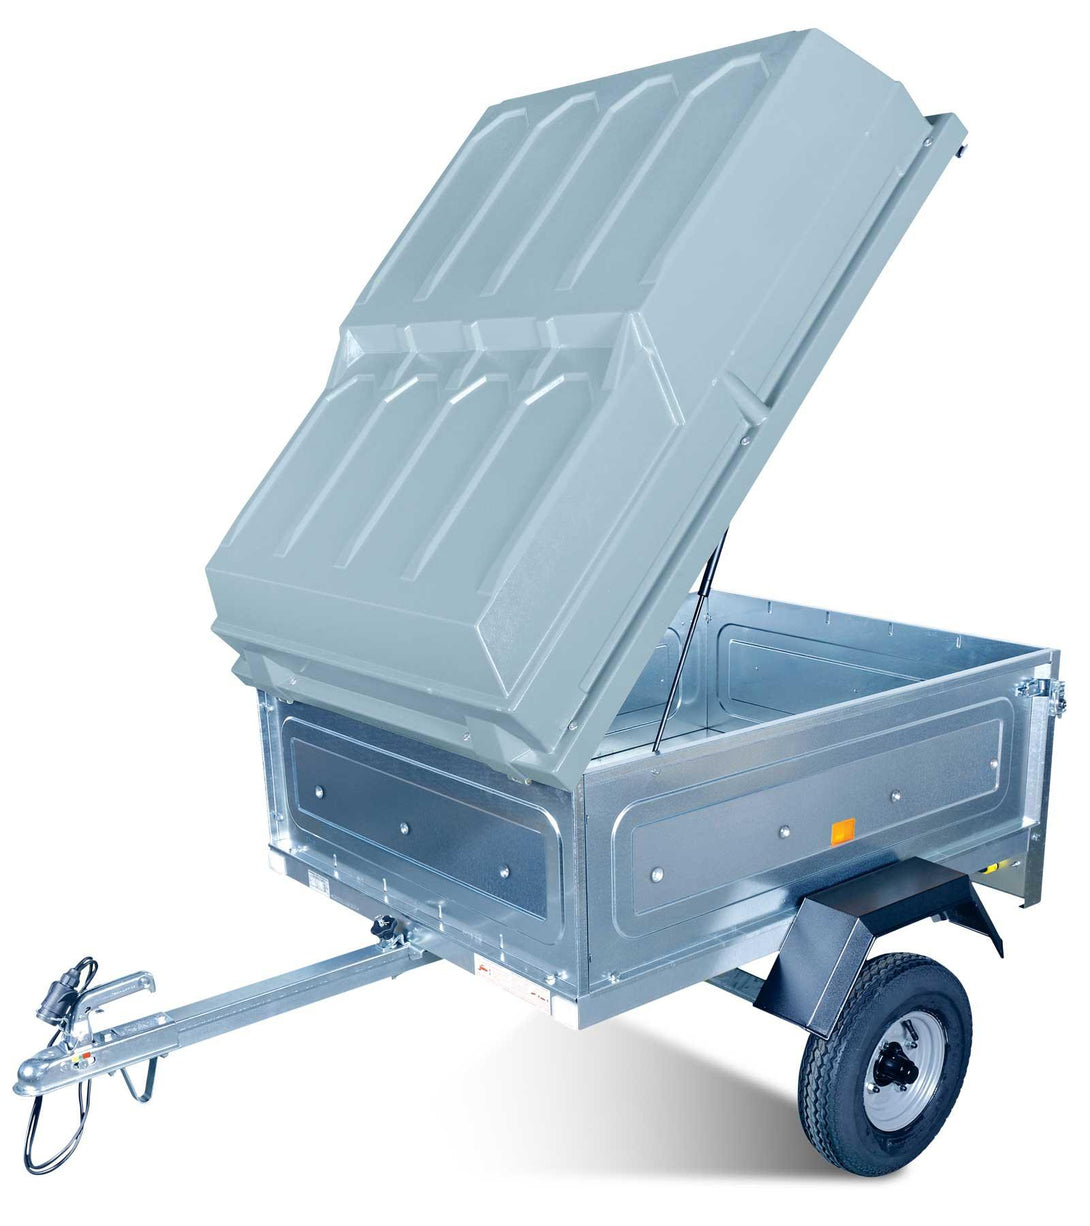 Lockable ABS Hard Trailer Cover - Suits Towsure 424 Trailer - Towsure